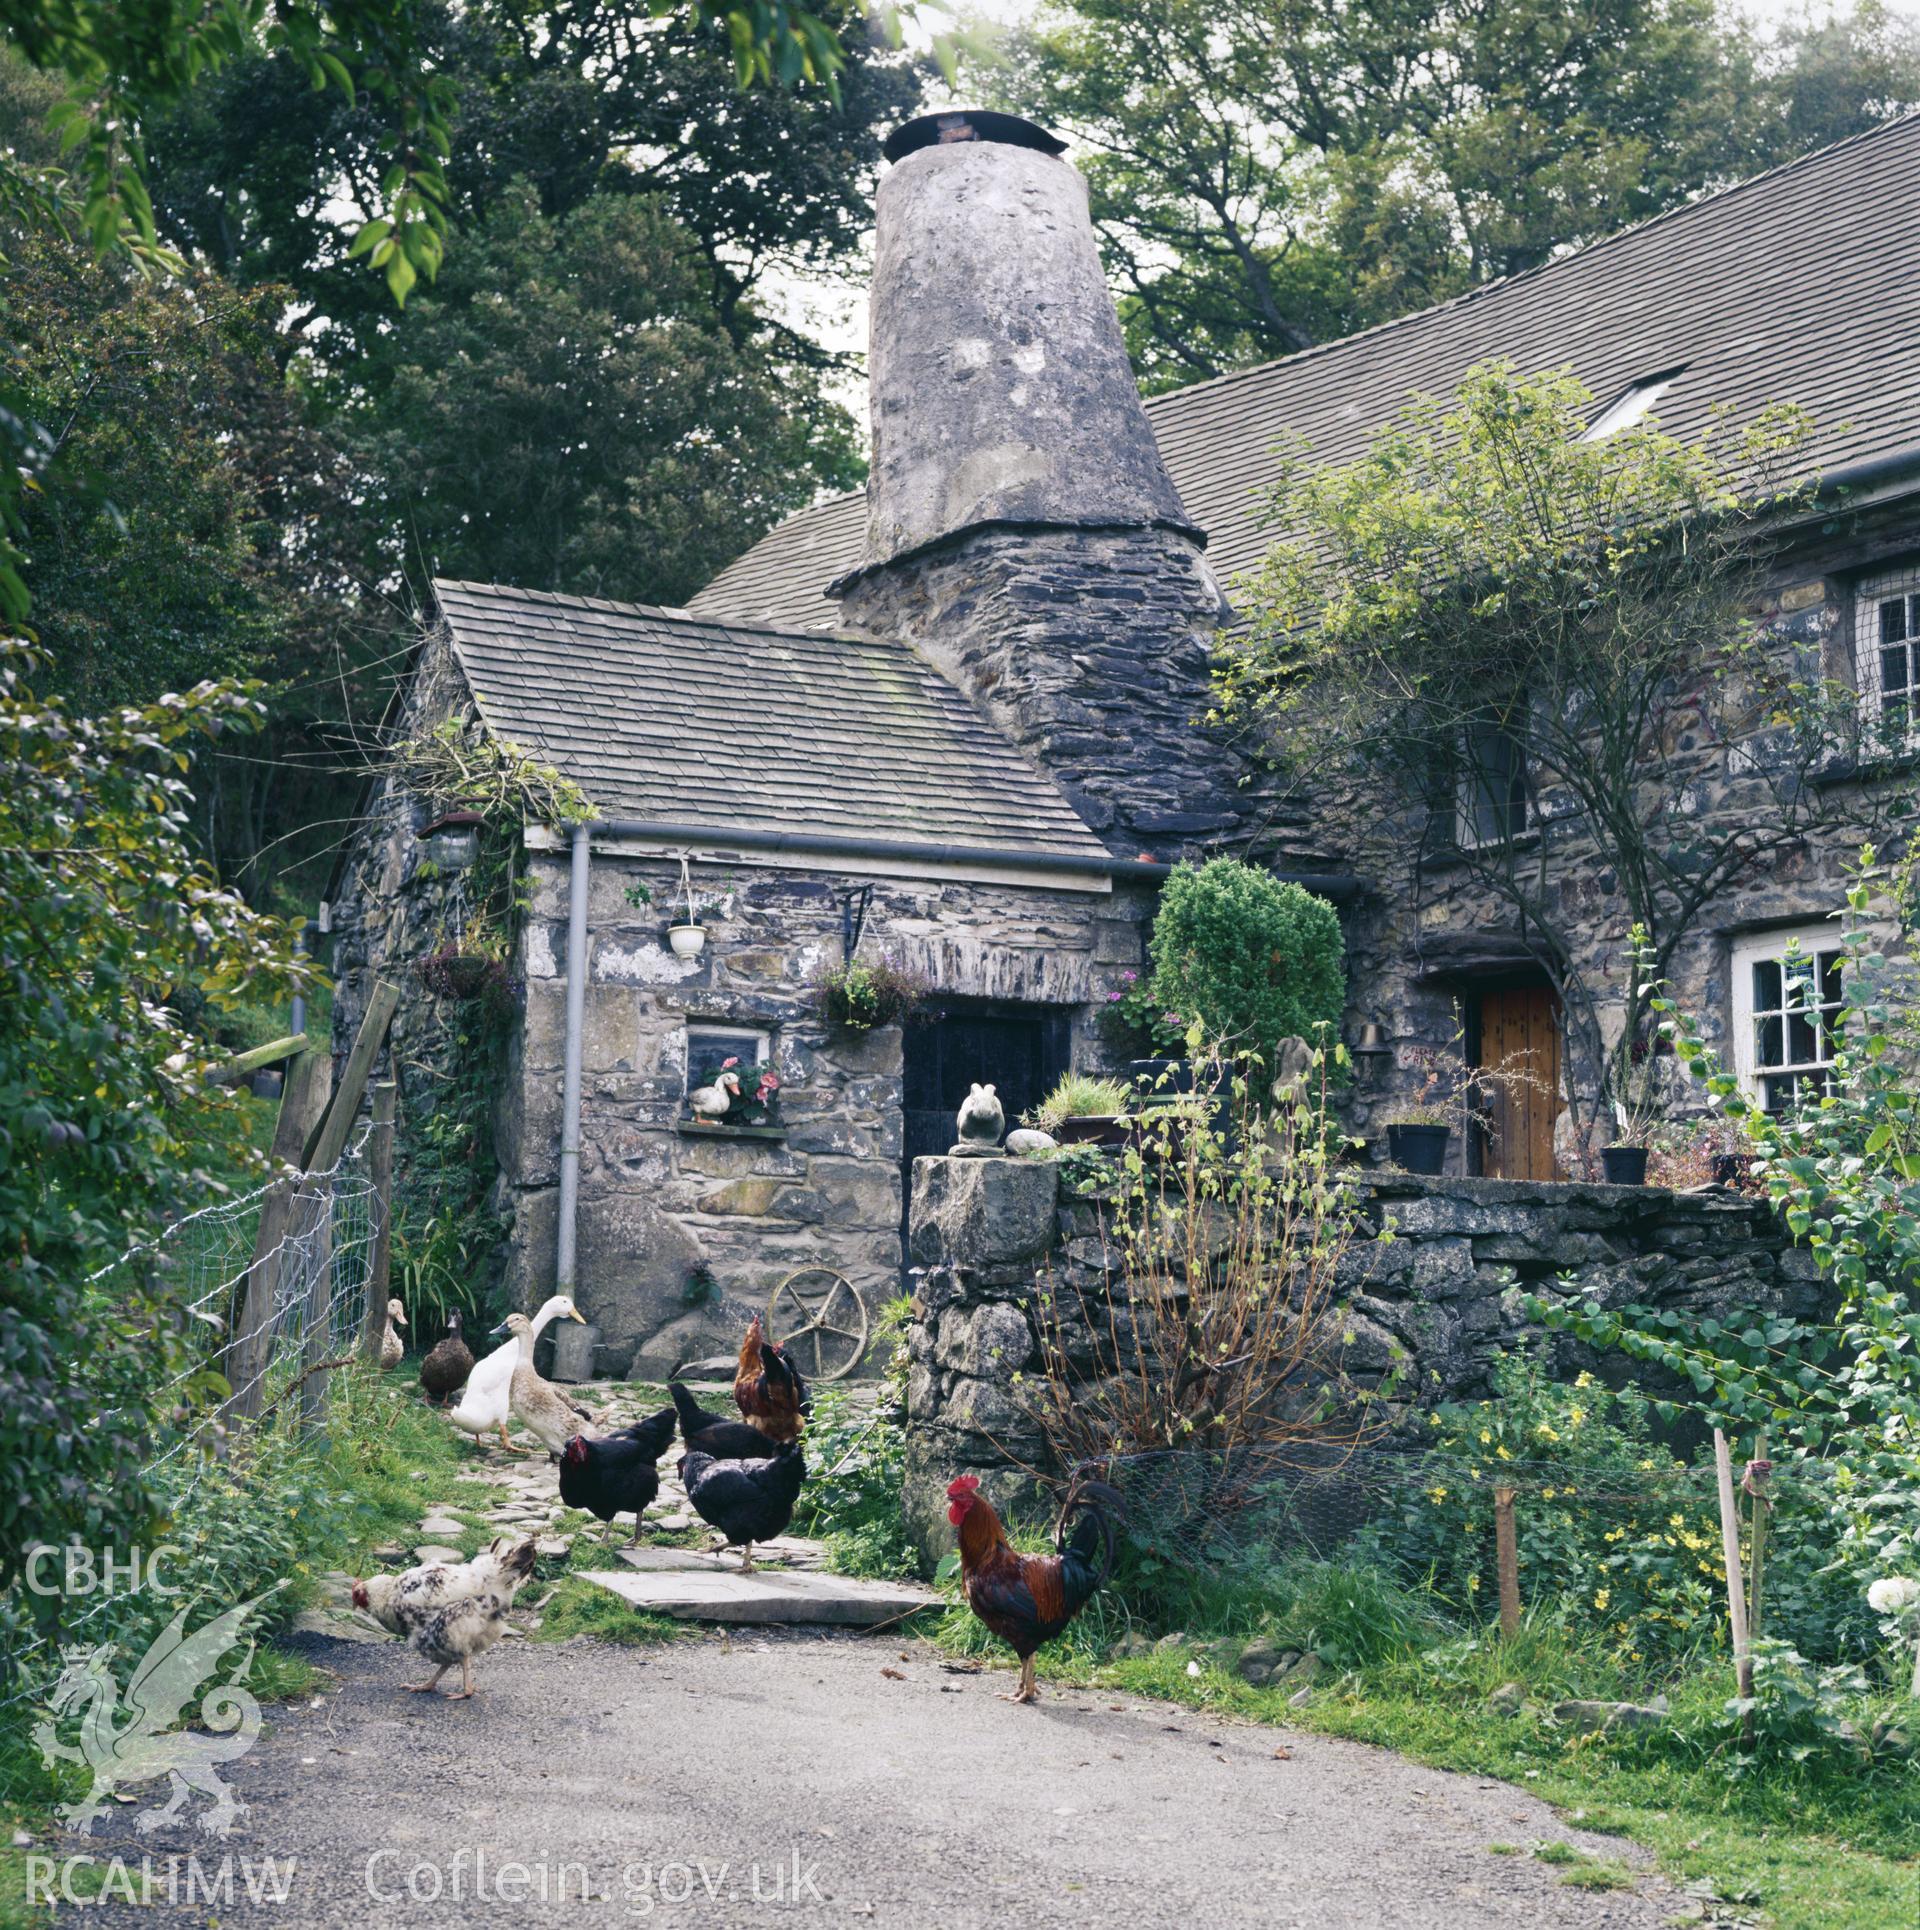 Colour transparency showing a view of Garn Farmhouse, Llanychaer, produced by Fleur James, c.1986.